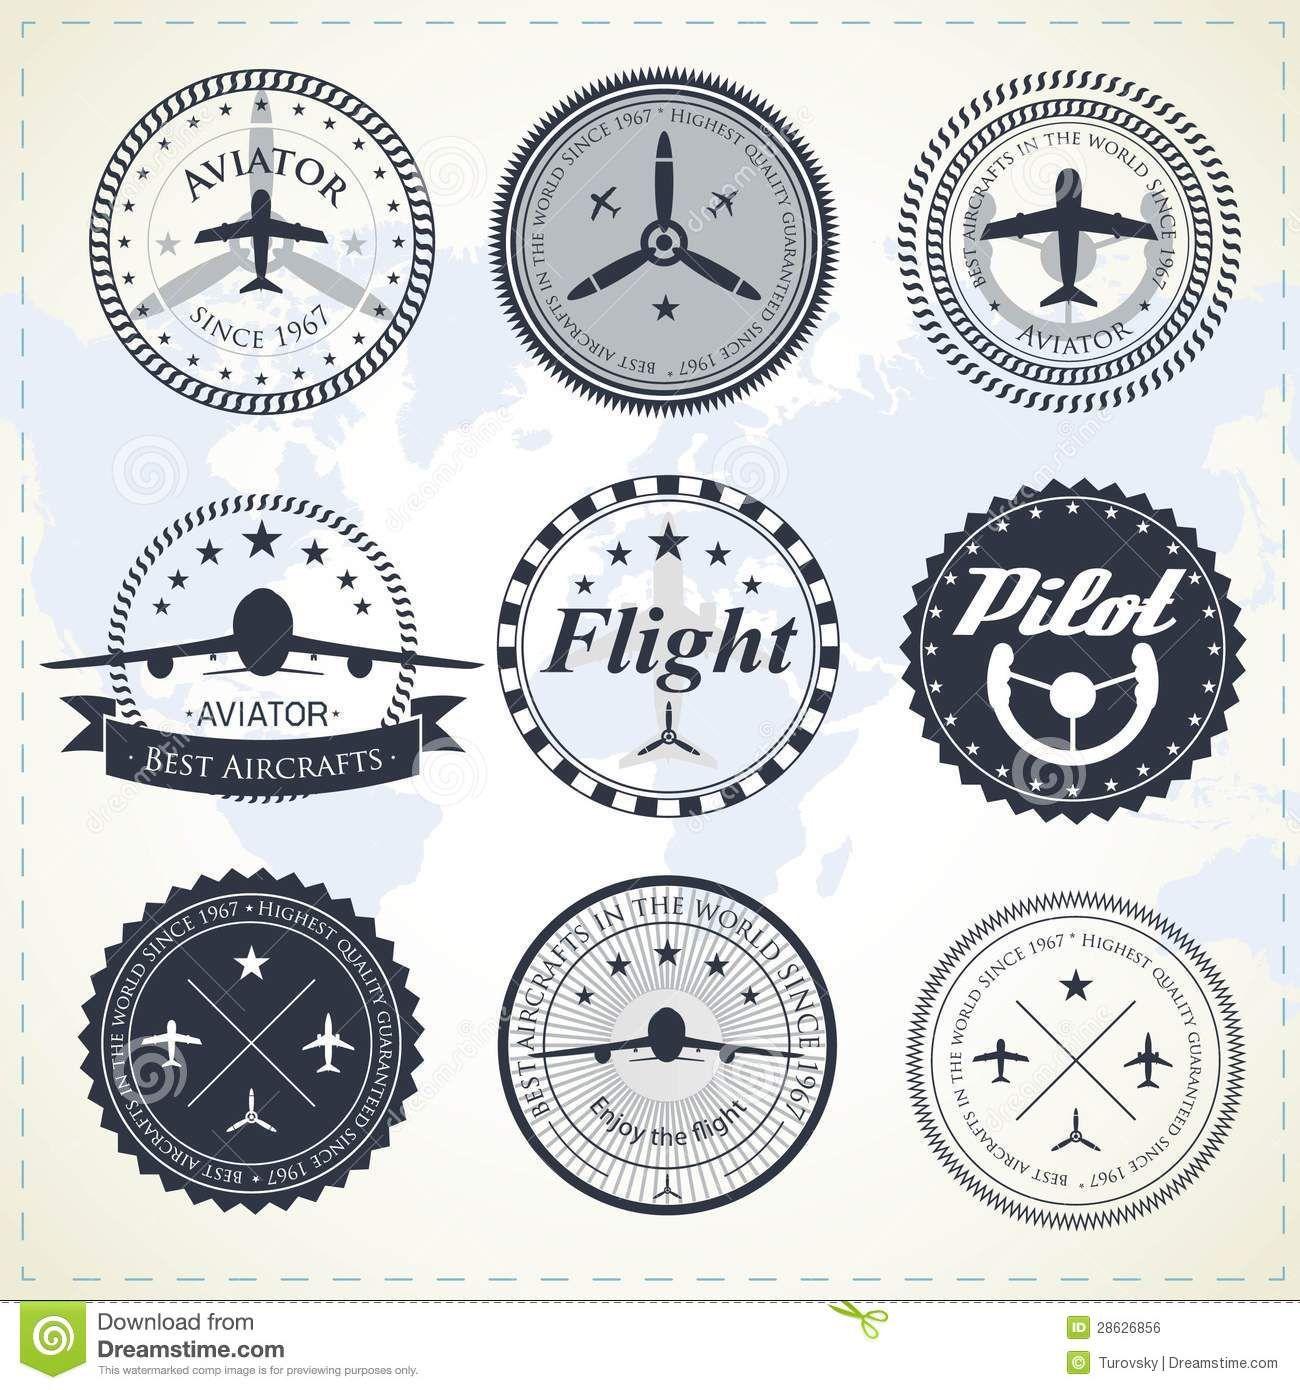 Best Known for Its Airplanes Logo - vintage aviation logos Search. Aviation. Aviat